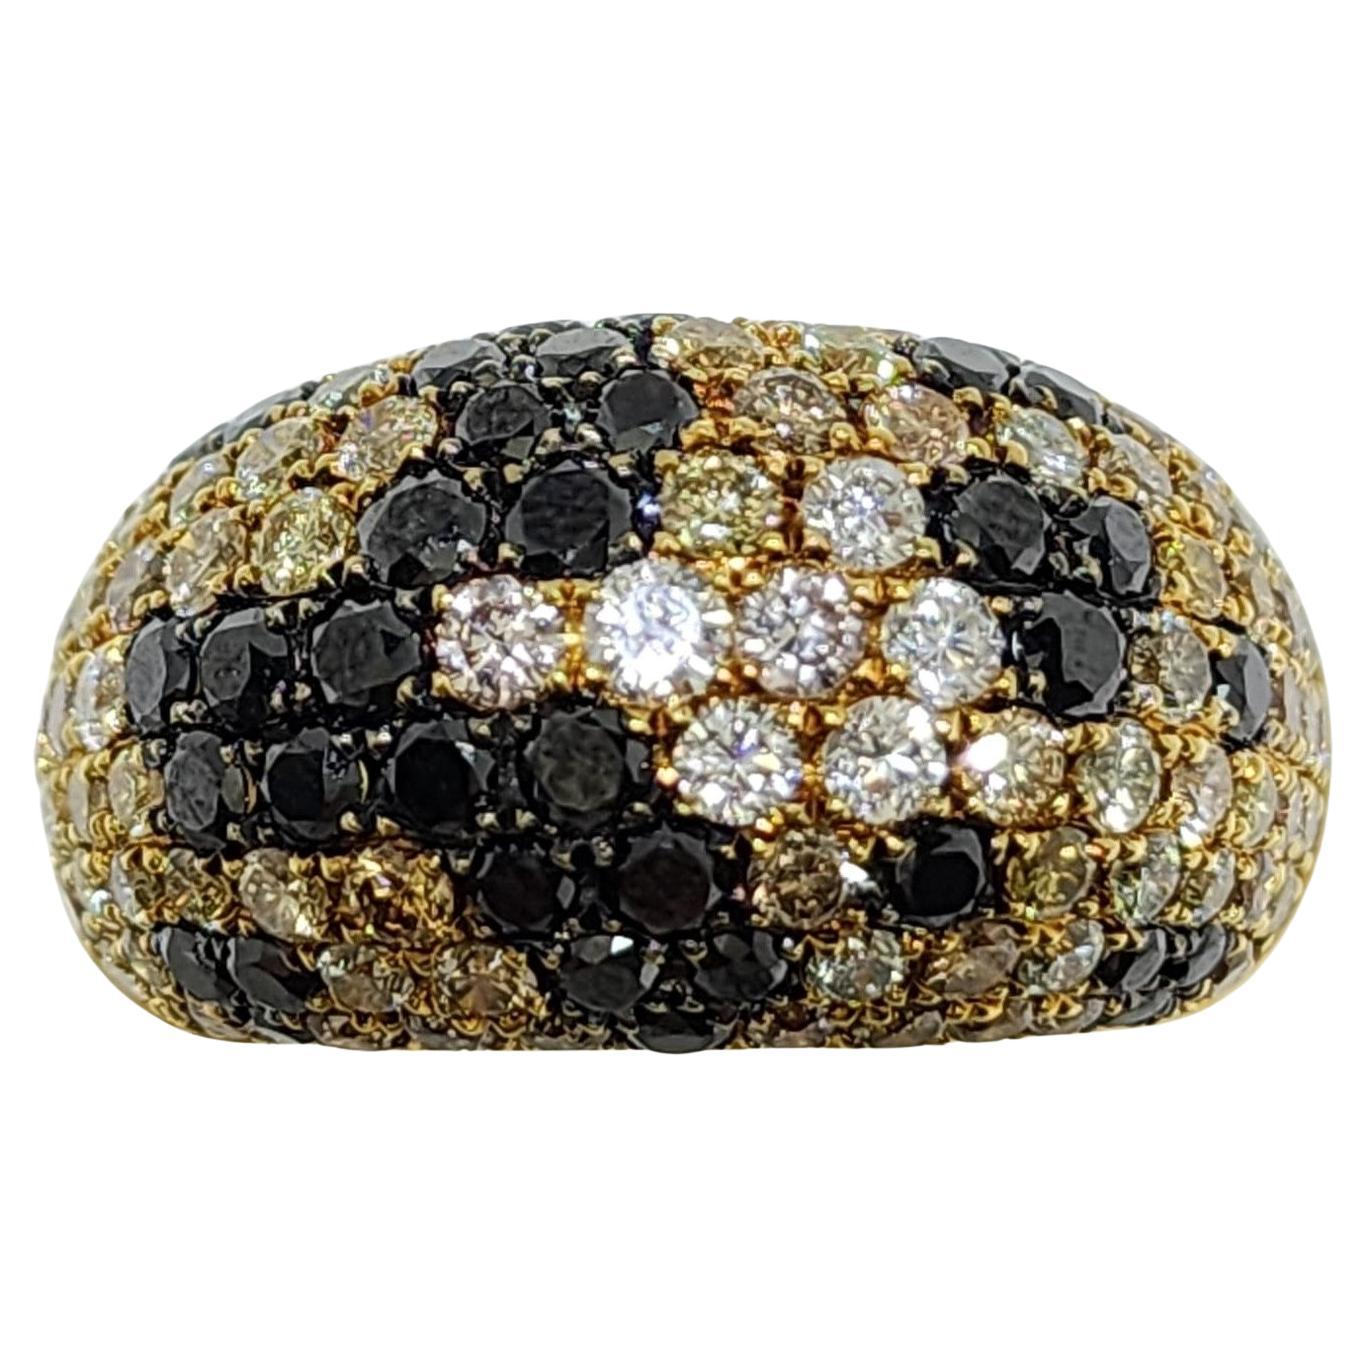 Introducing our beautiful Vintage 9 Row Pave Diamond Dome Ring, crafted with the utmost attention to detail and quality. This stunning ring is set in 18 karat yellow gold and features a unique dome shape that is sure to capture your heart.

The ring